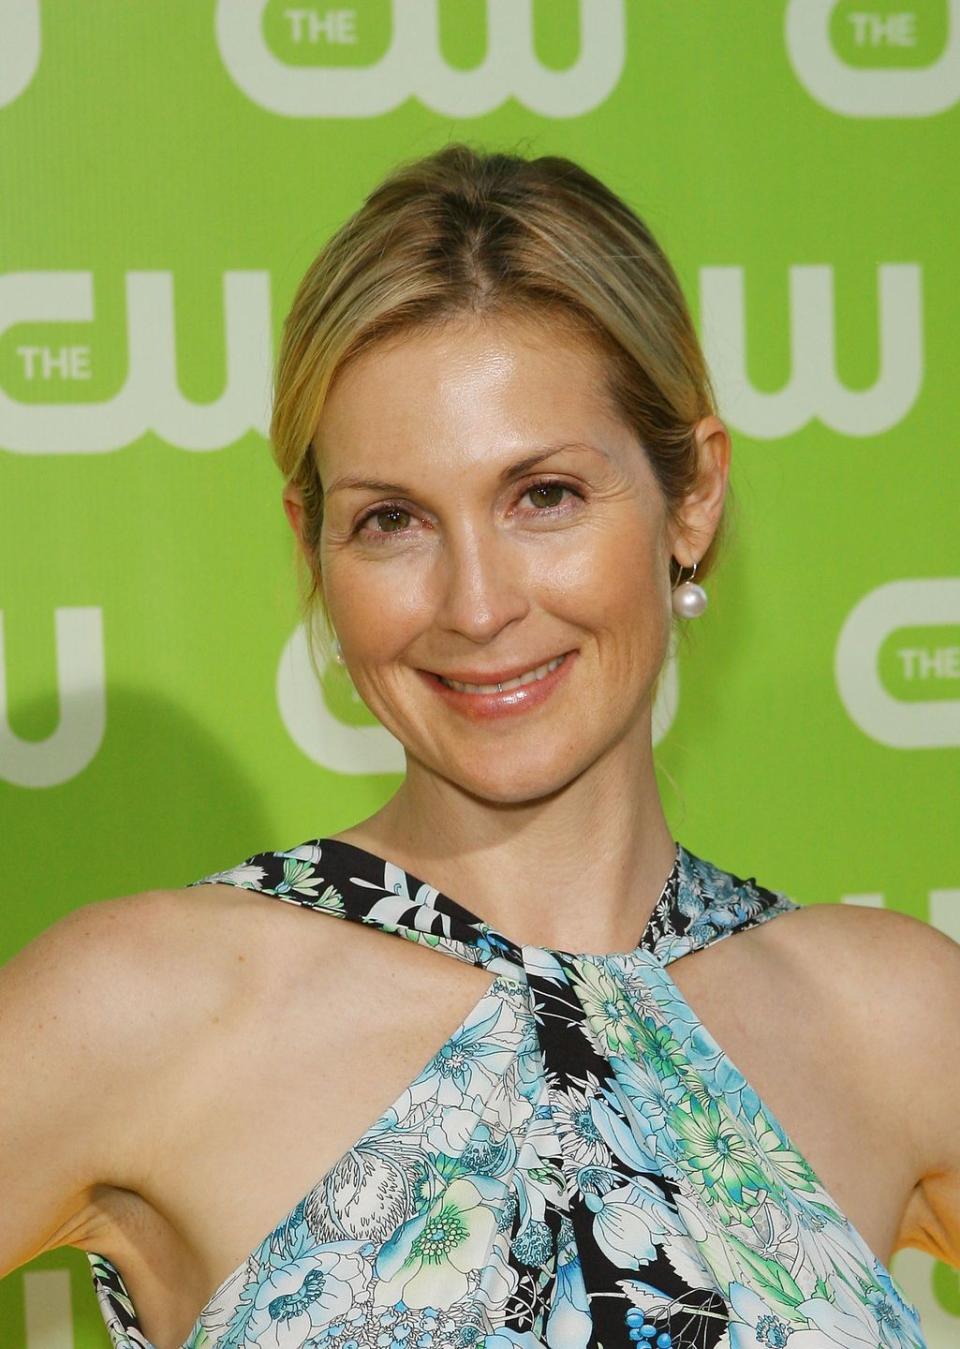 Then: Kelly Rutherford